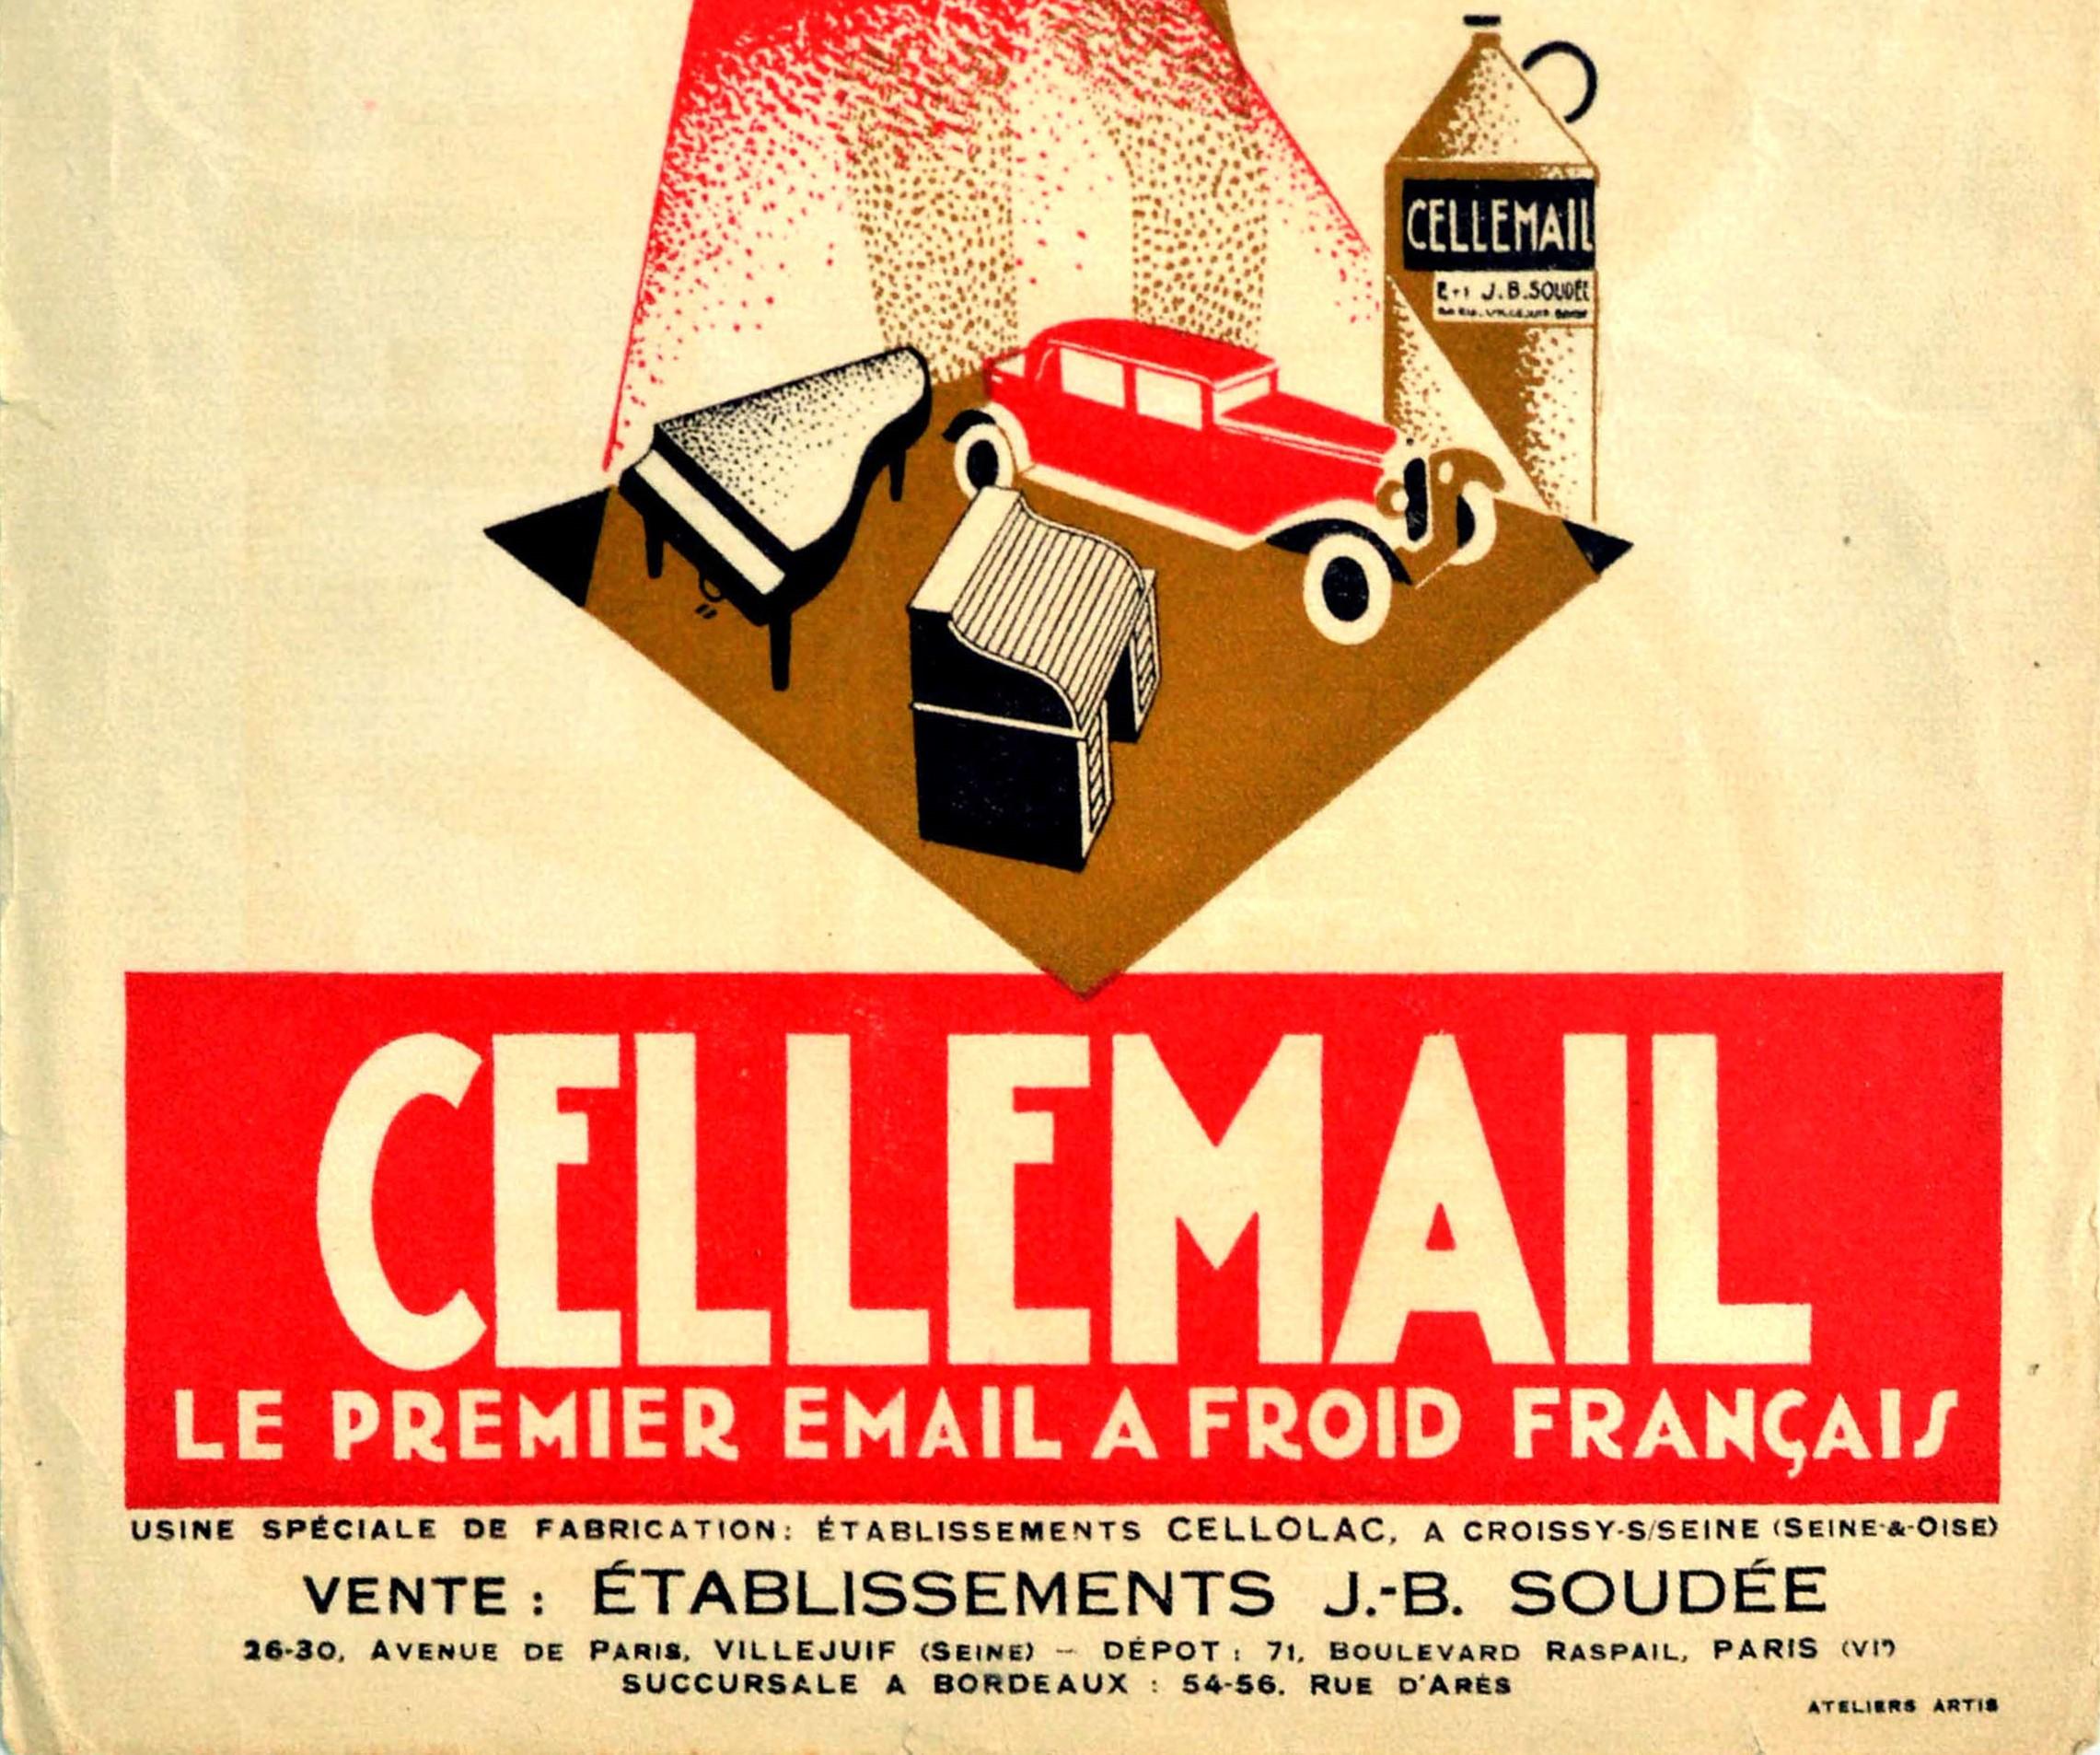 Original Antike Poster Cellemail Le Premier Email A Froid Francais Emaille-Farbe (Art déco) im Angebot